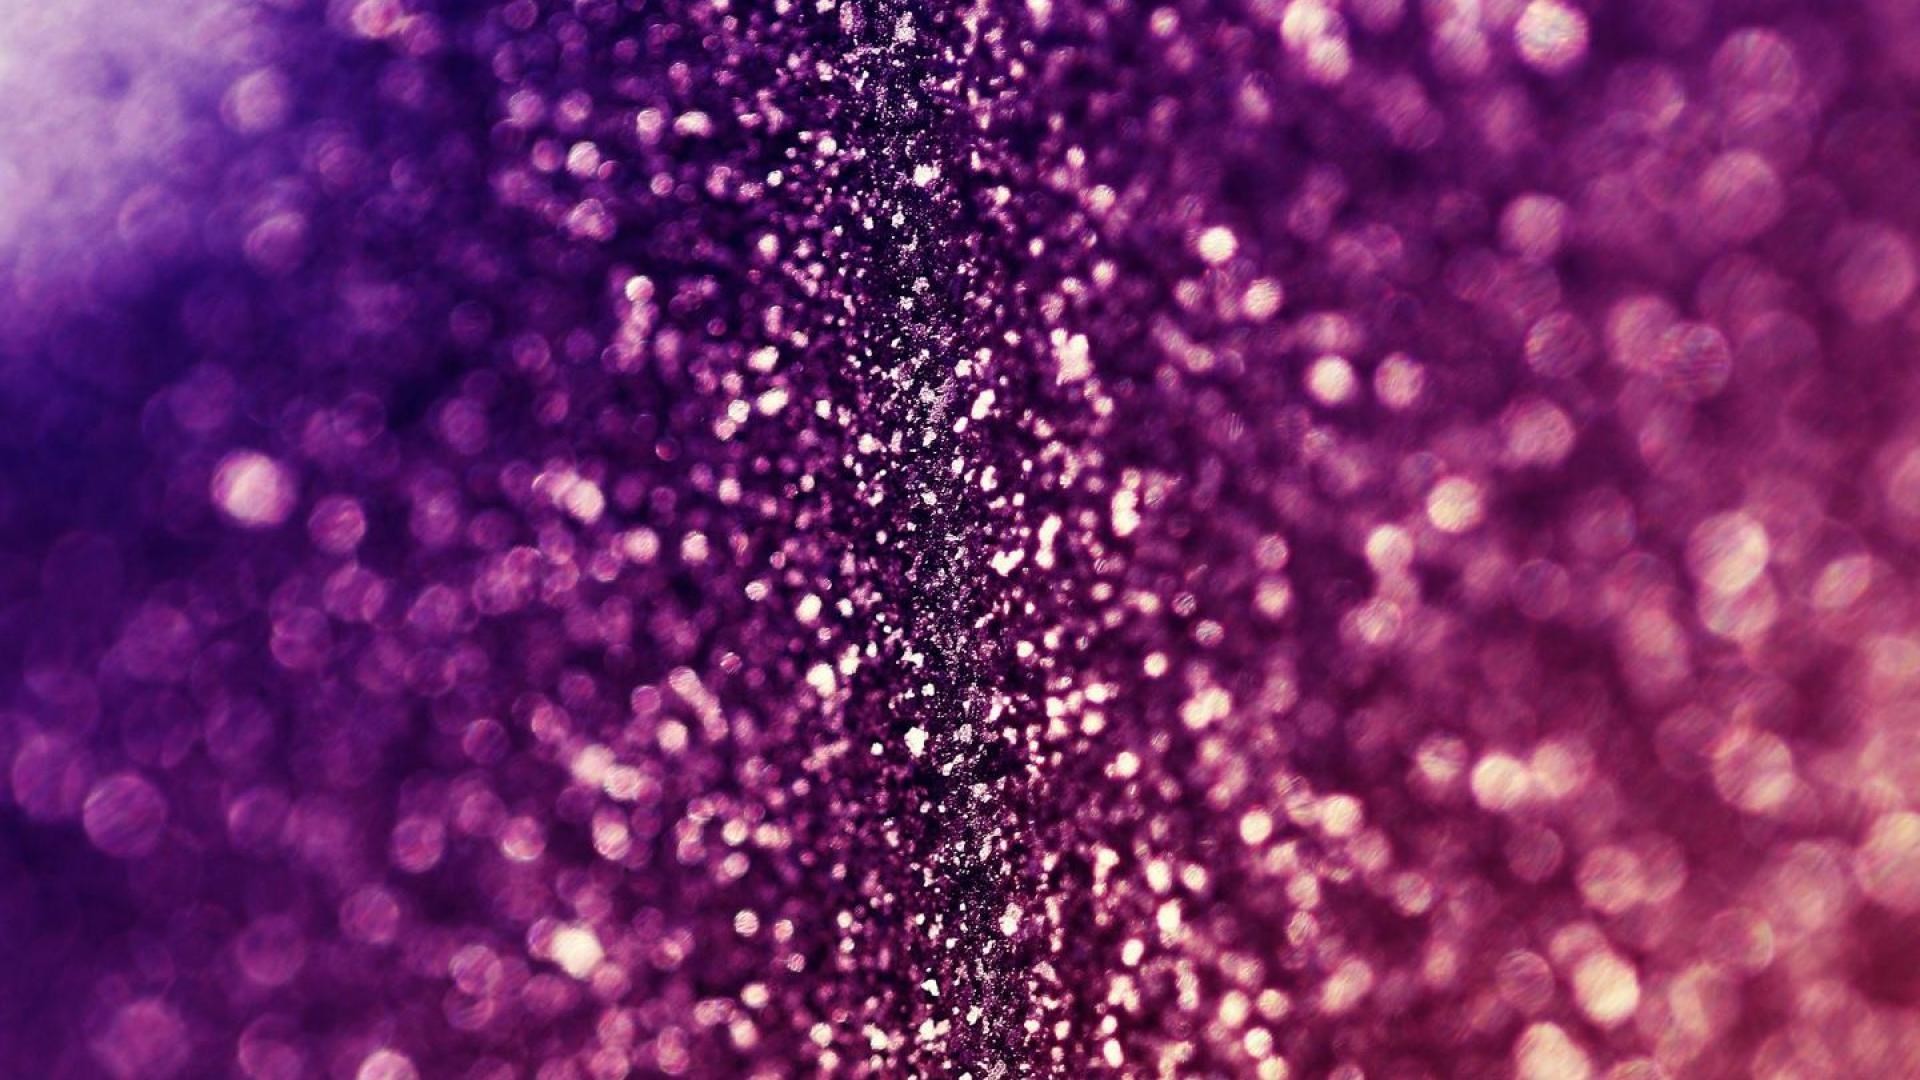 Glitter hd wallpapers 1080p high quality